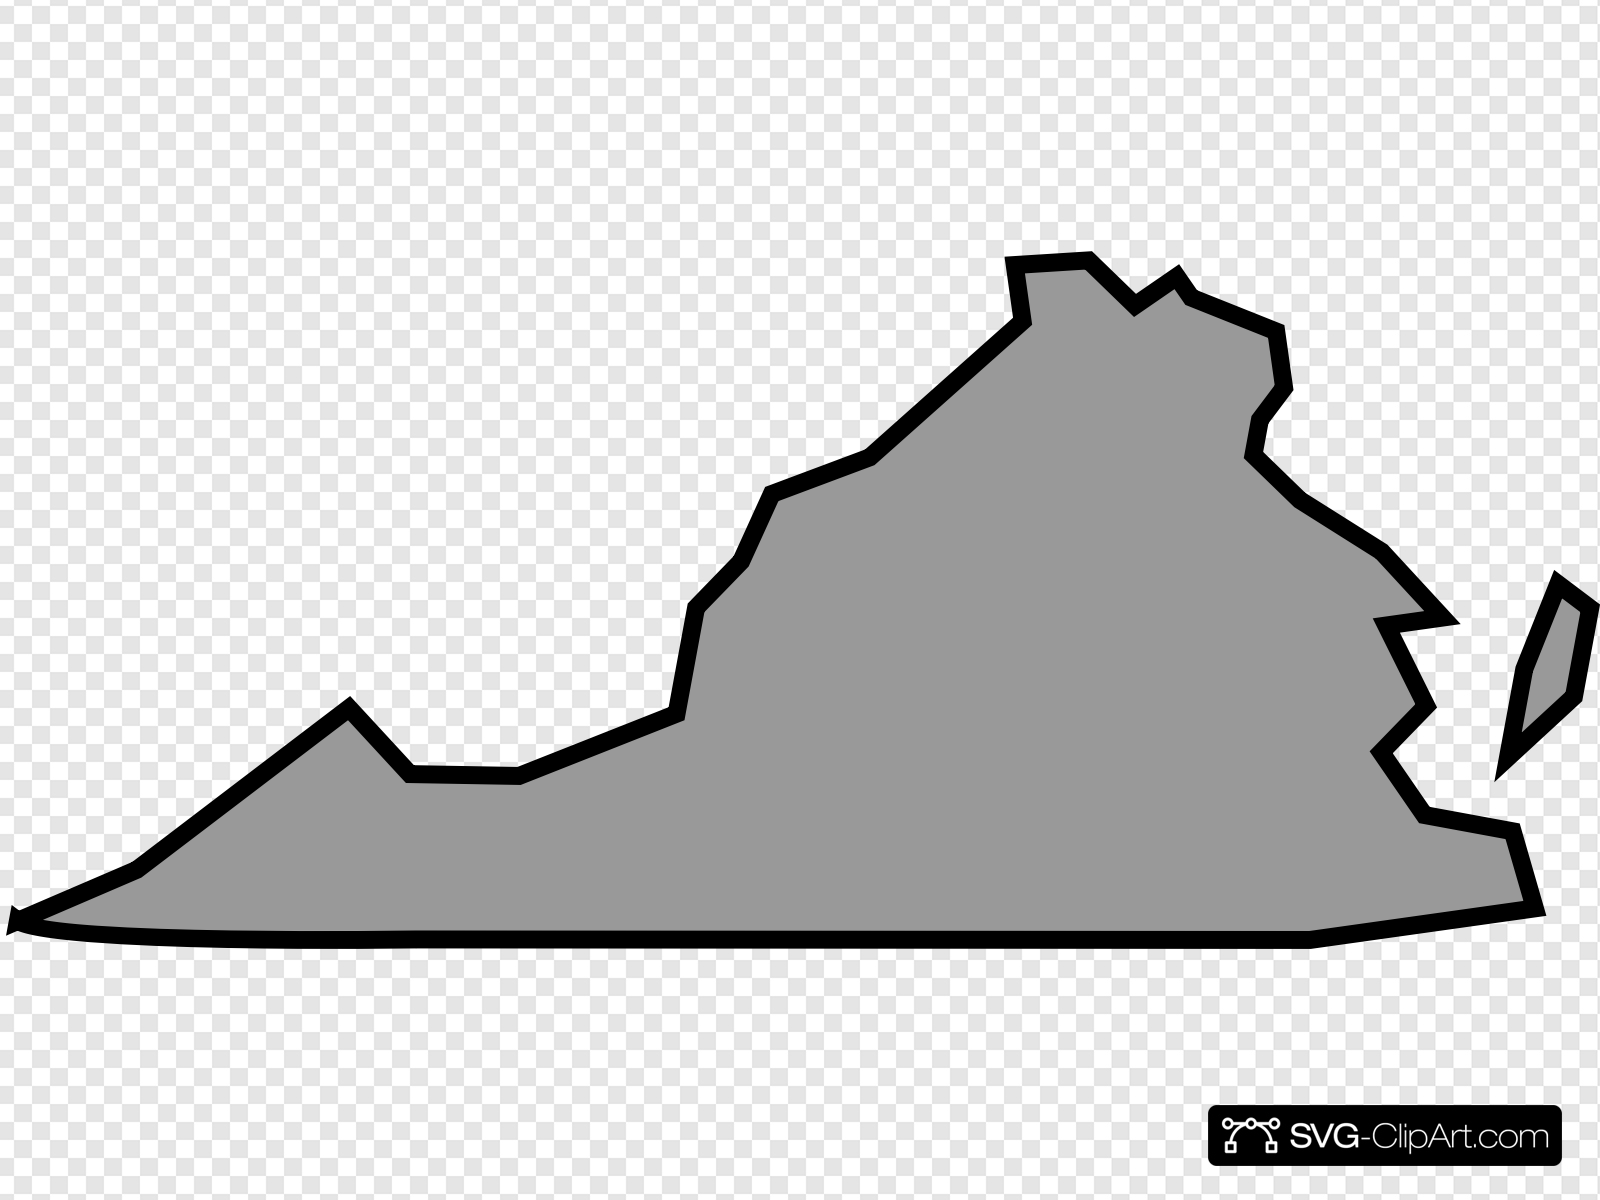 Virginia State In Light Gray Clip art, Icon and SVG.